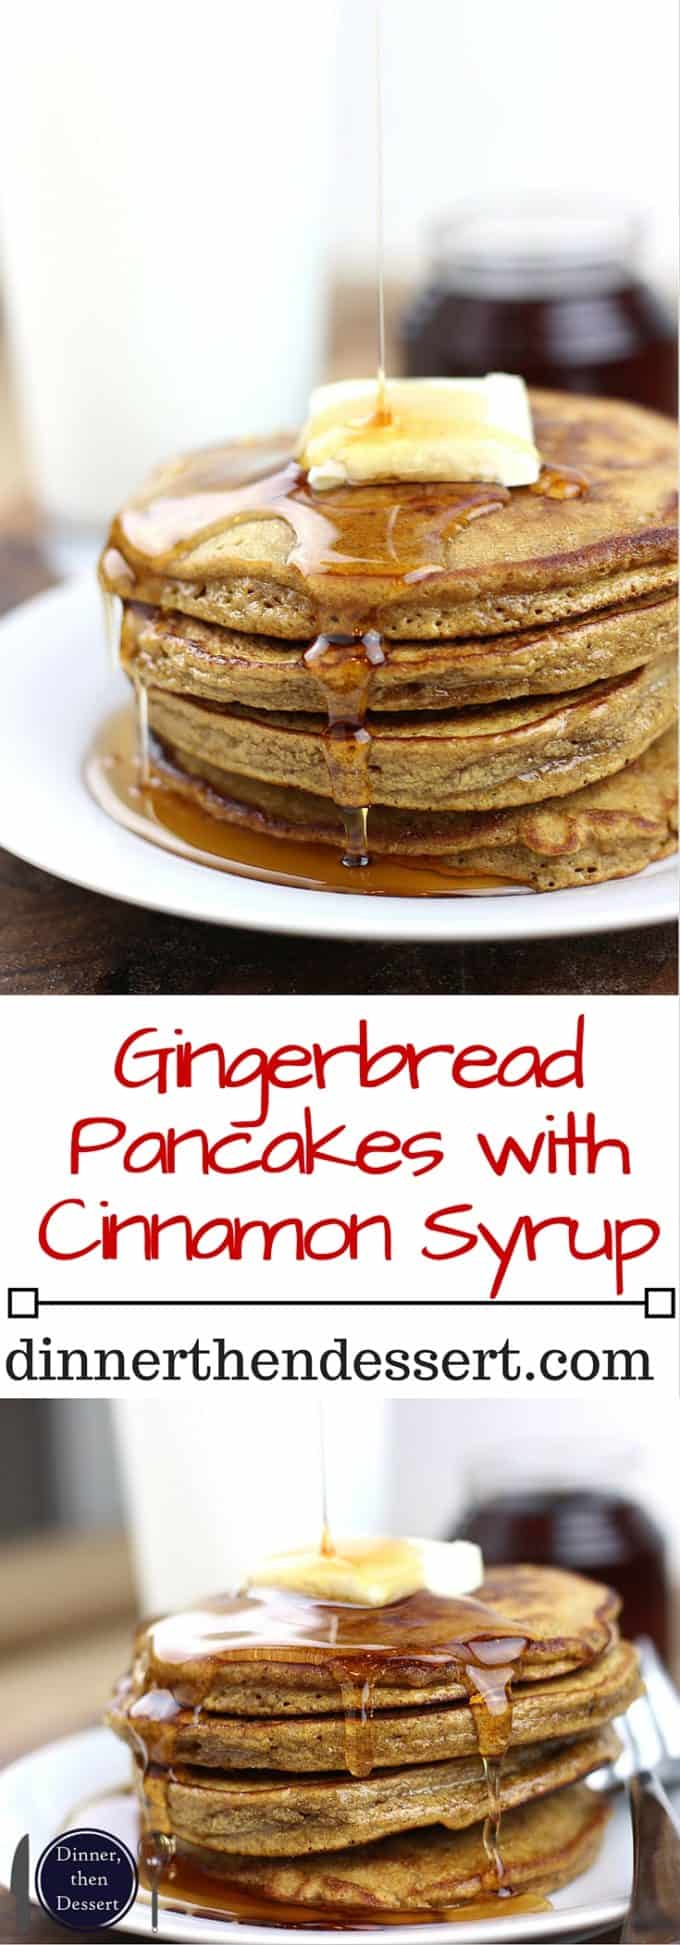 Celebrate the winter holidays with these delicious gingerbread pancakes and cinnamon syrup. Ready to eat in less than 30 minutes these are part of our family tradition and will soon be a part of yours!